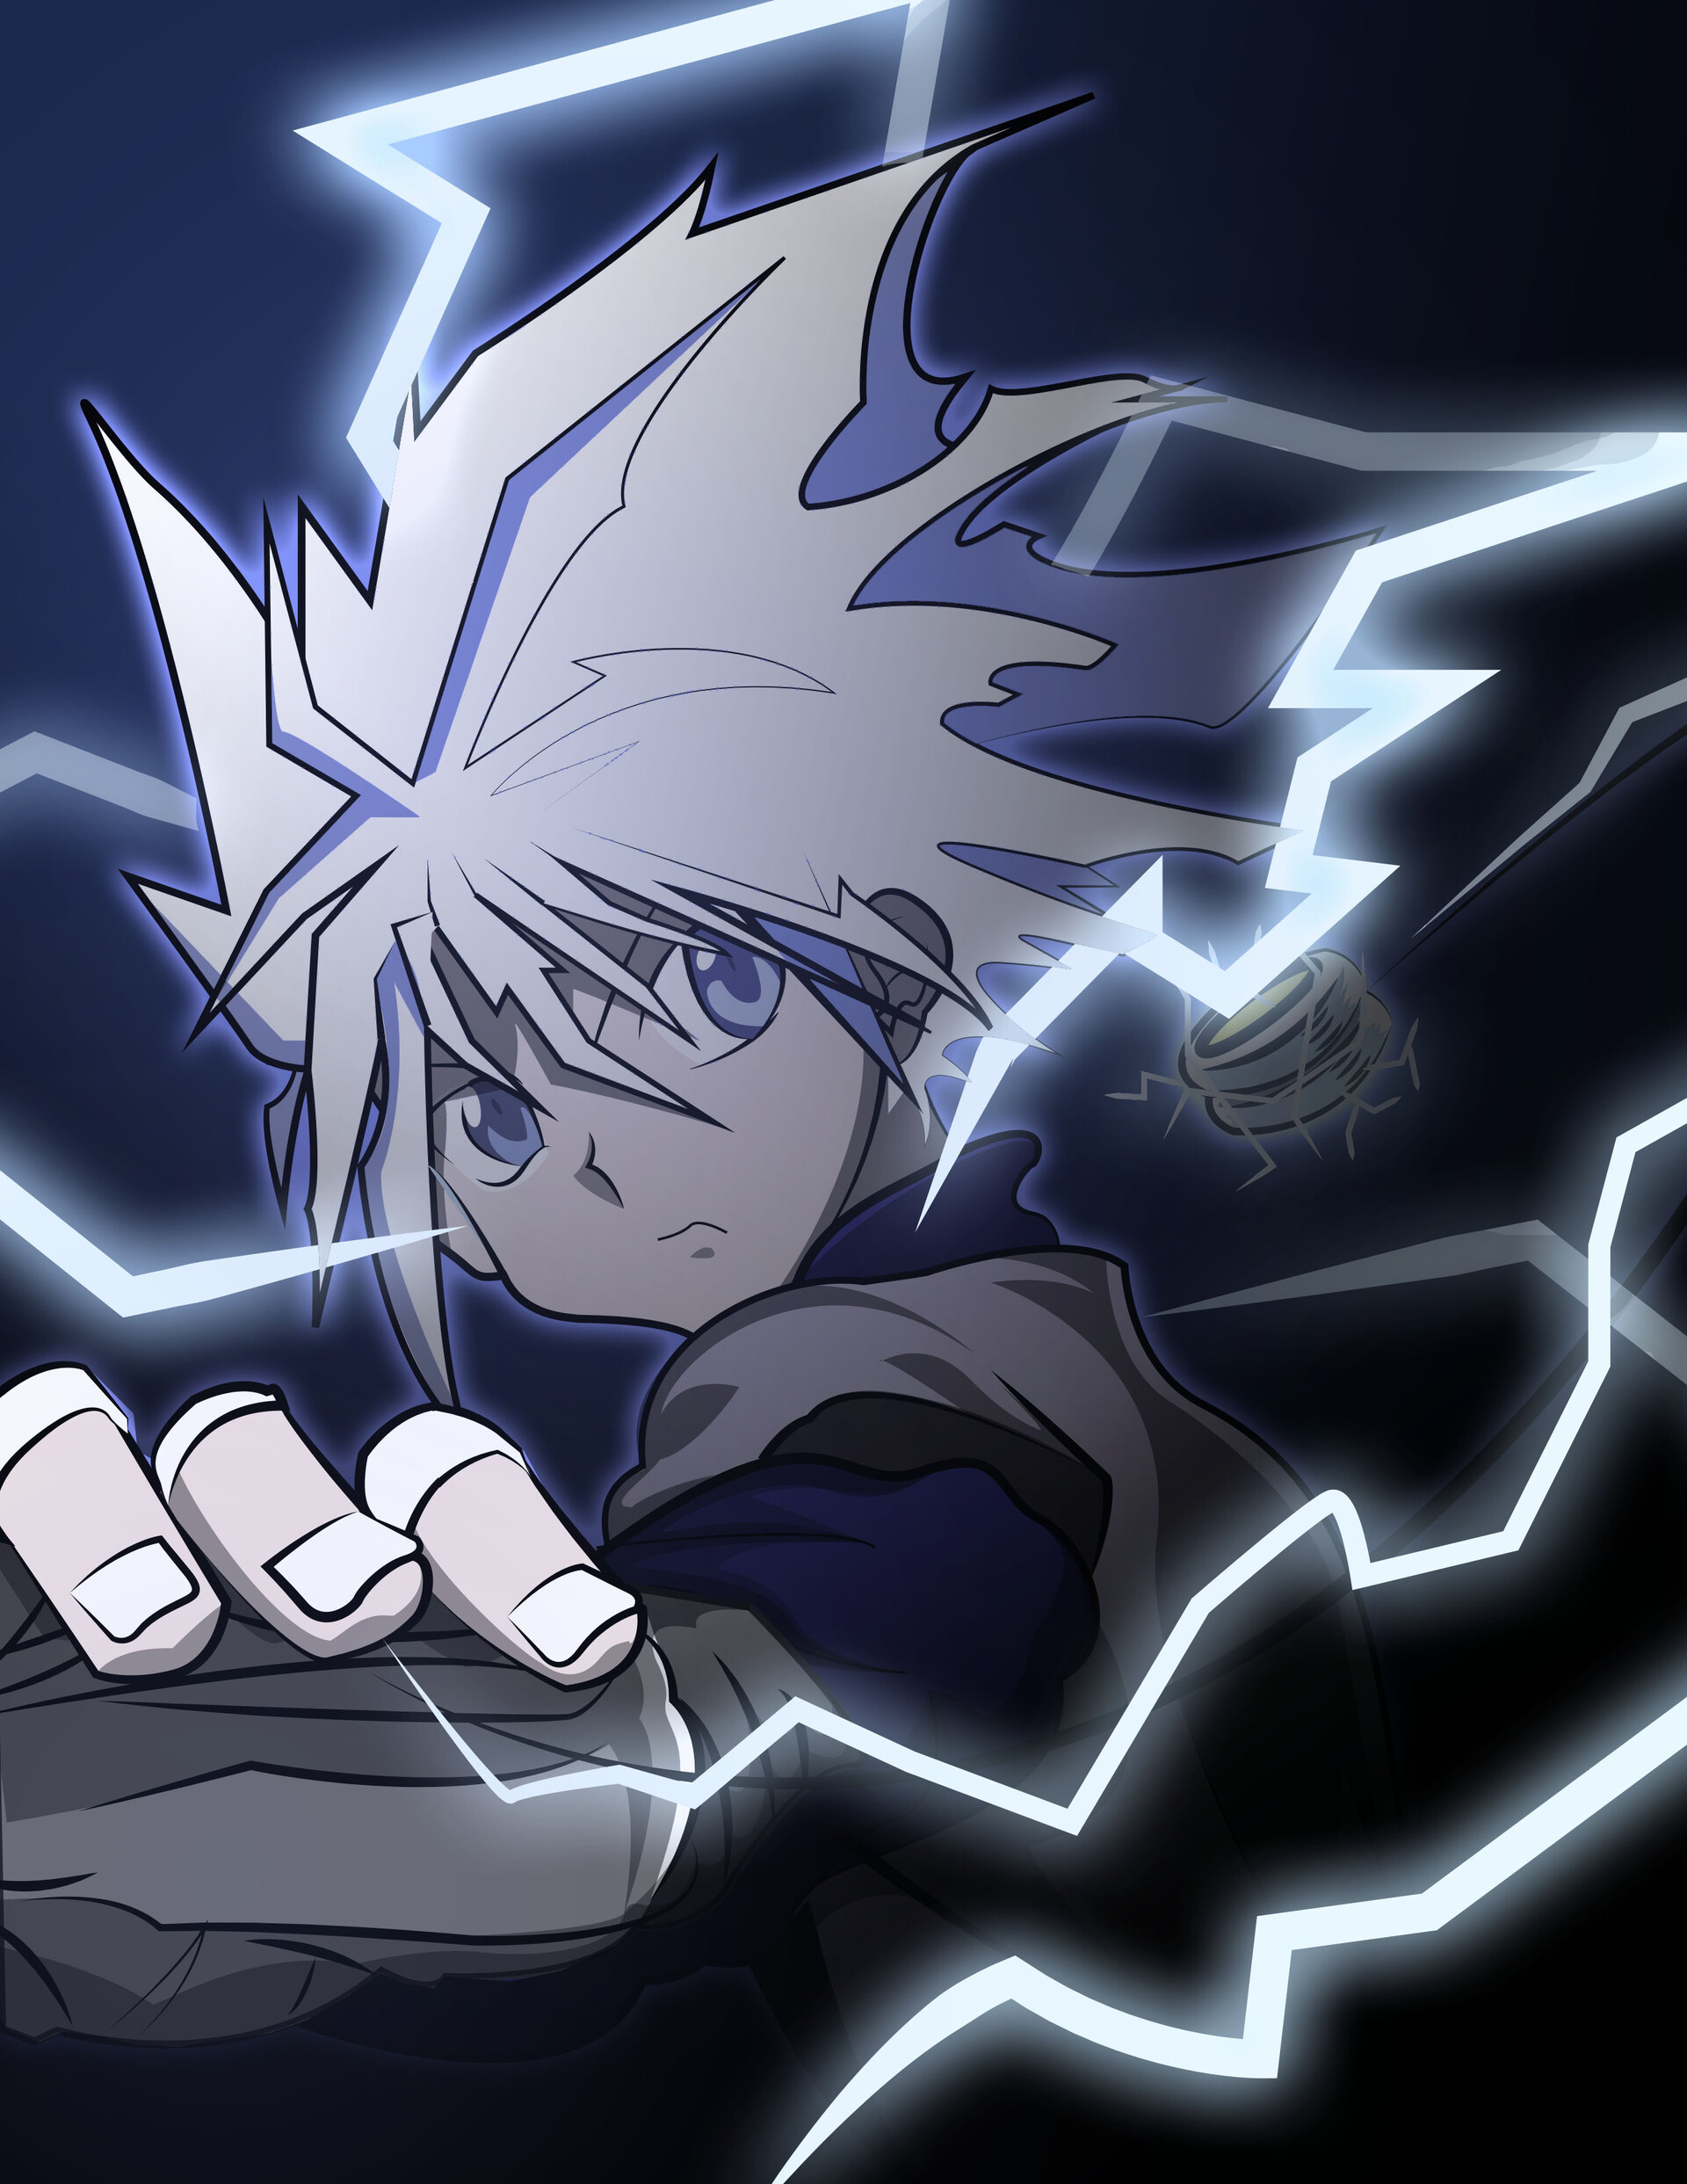 Featured image of post Killua Lightning Godspeed Killua zoldyck lightning page 1 killua godspeed gifs killua zoldyck these pictures of this page are about killua zoldyck lightning